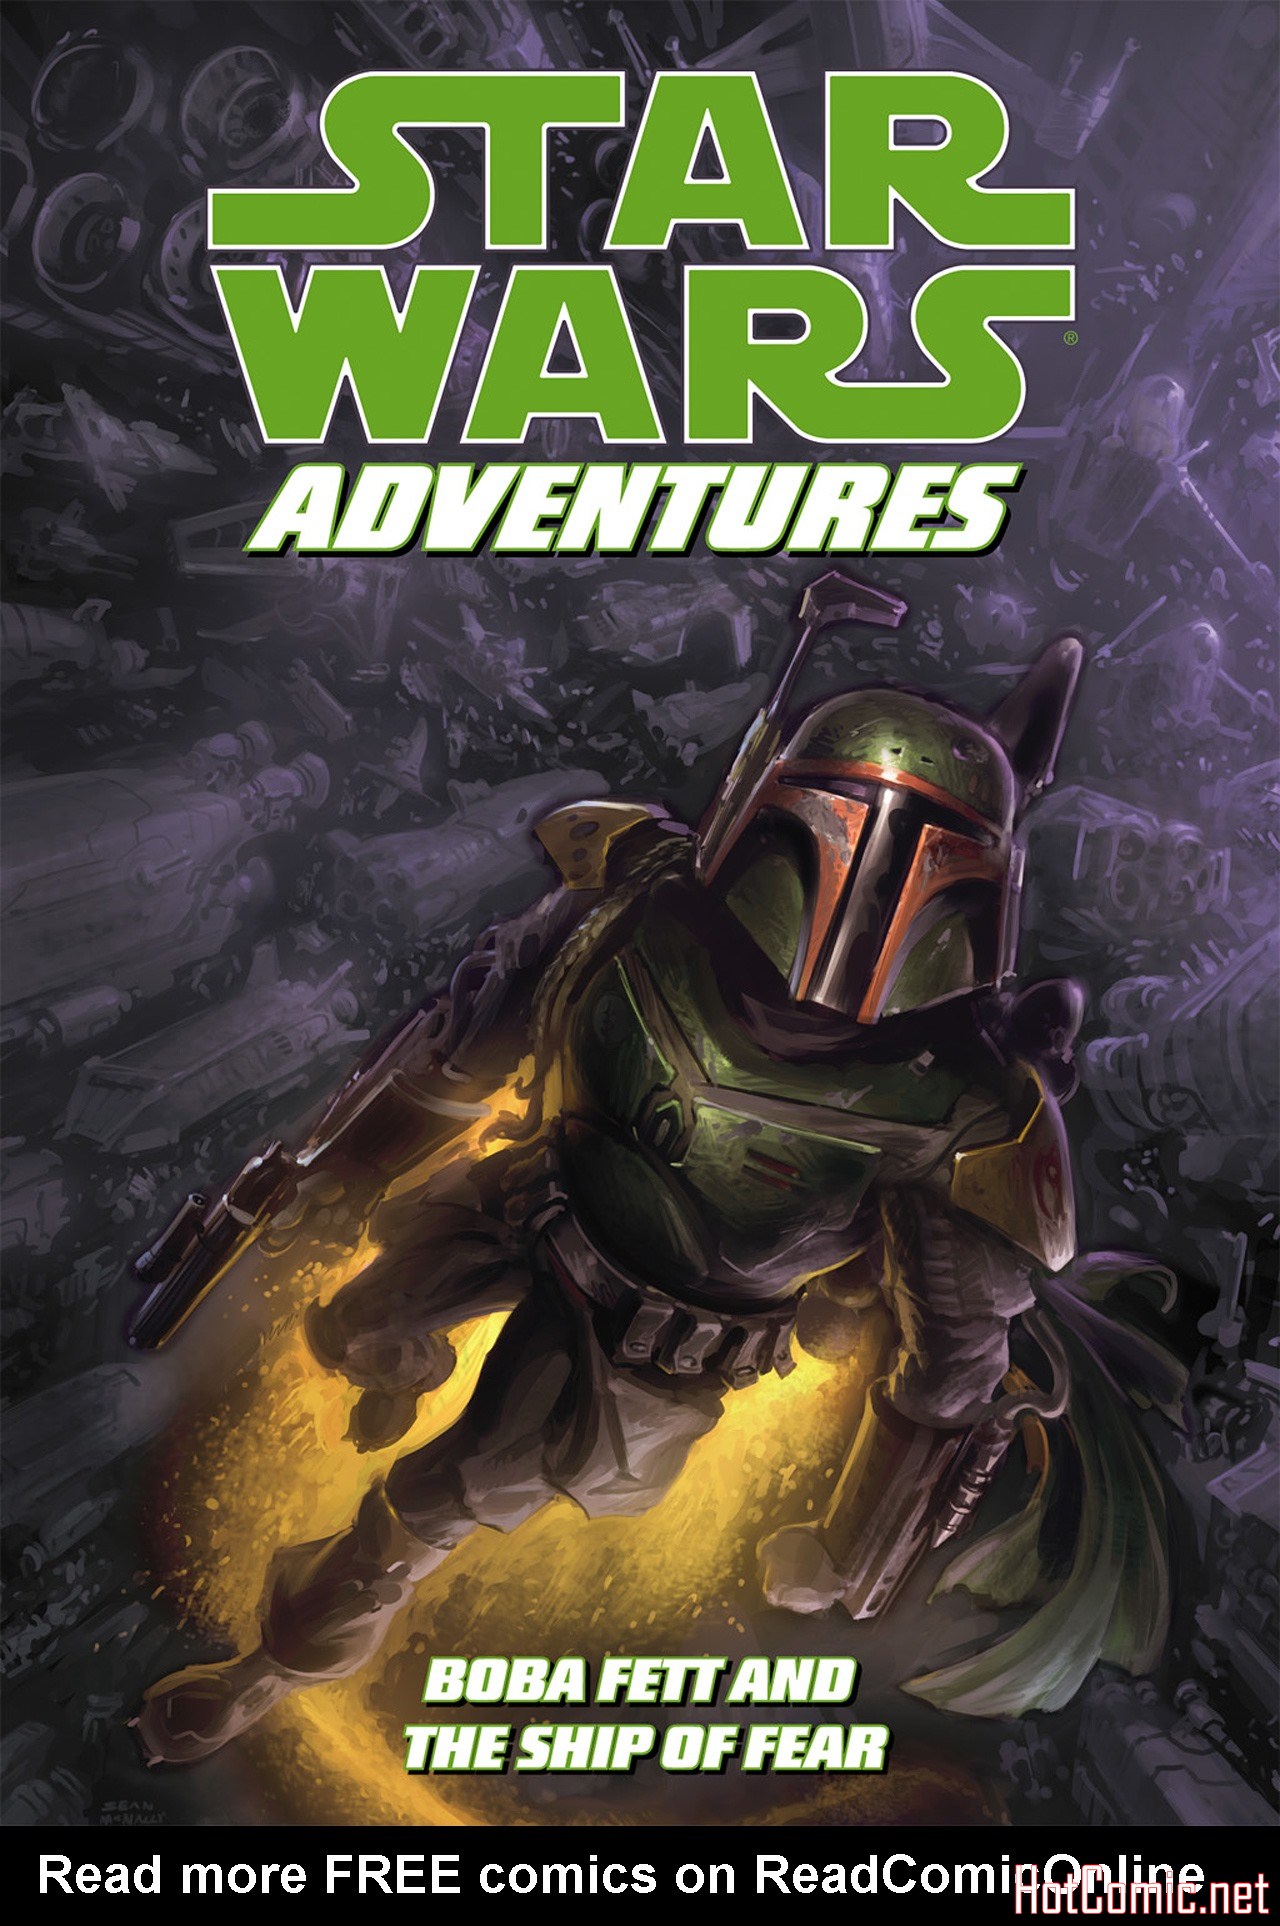 Star Wars Adventures - Boba Fett and the Ship of Fear